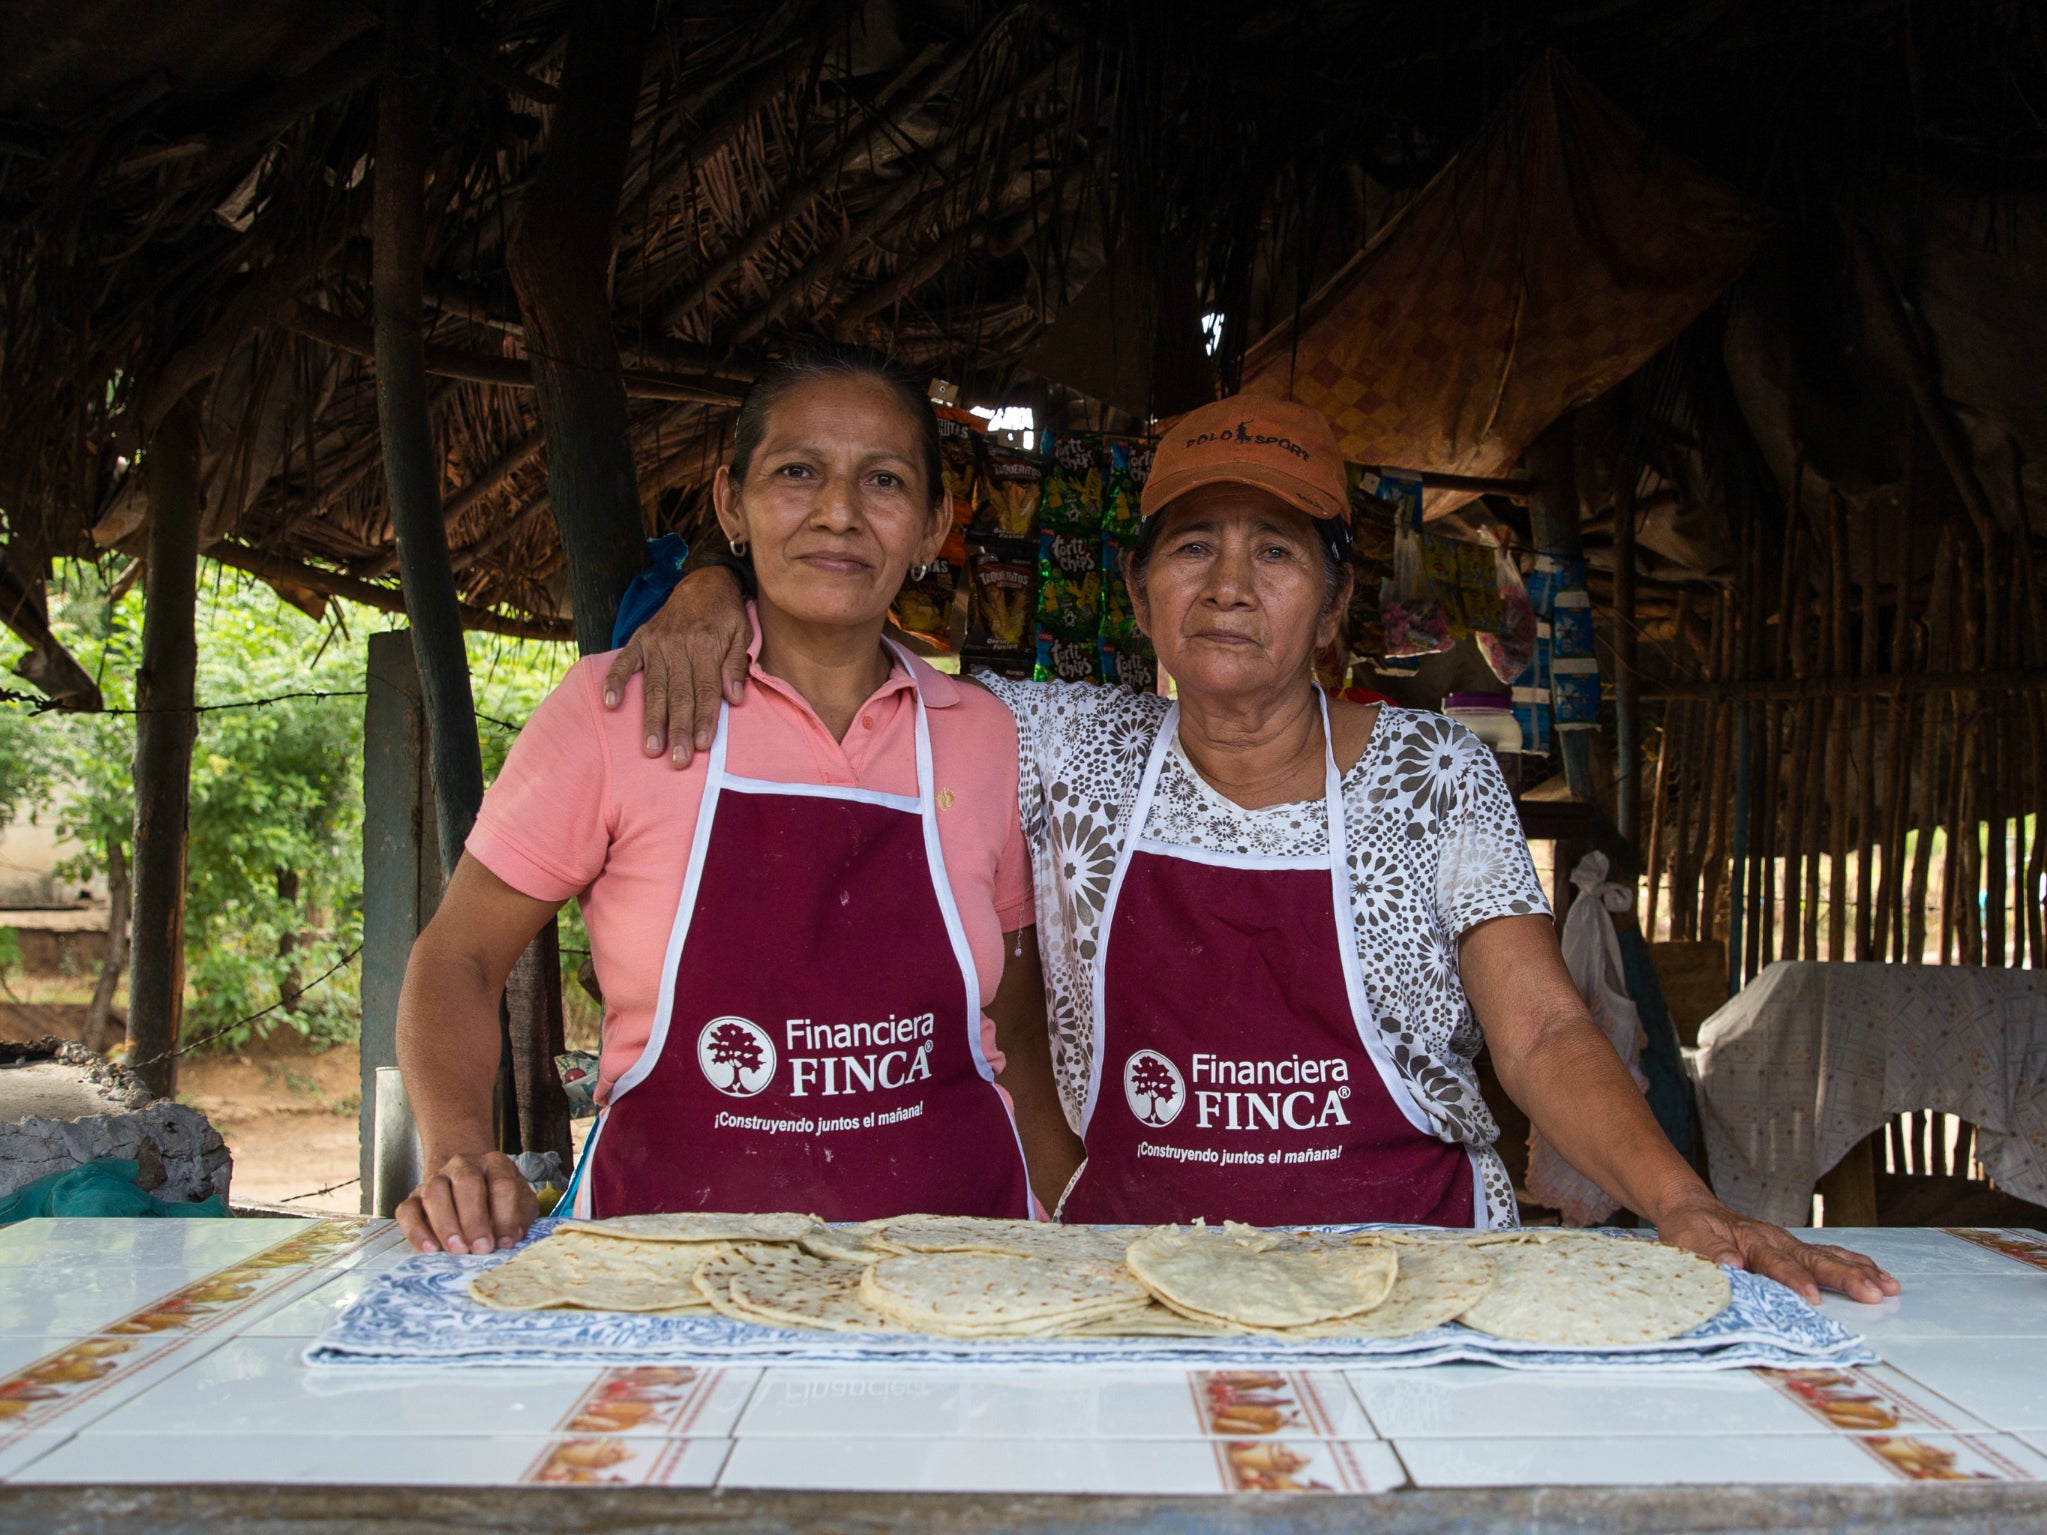 Julia and her daughter Isabel, get up at 4am and work till 5pm making and selling tortillas for the neighbourhood; the profits from the business have allowed Julia to buy a car.